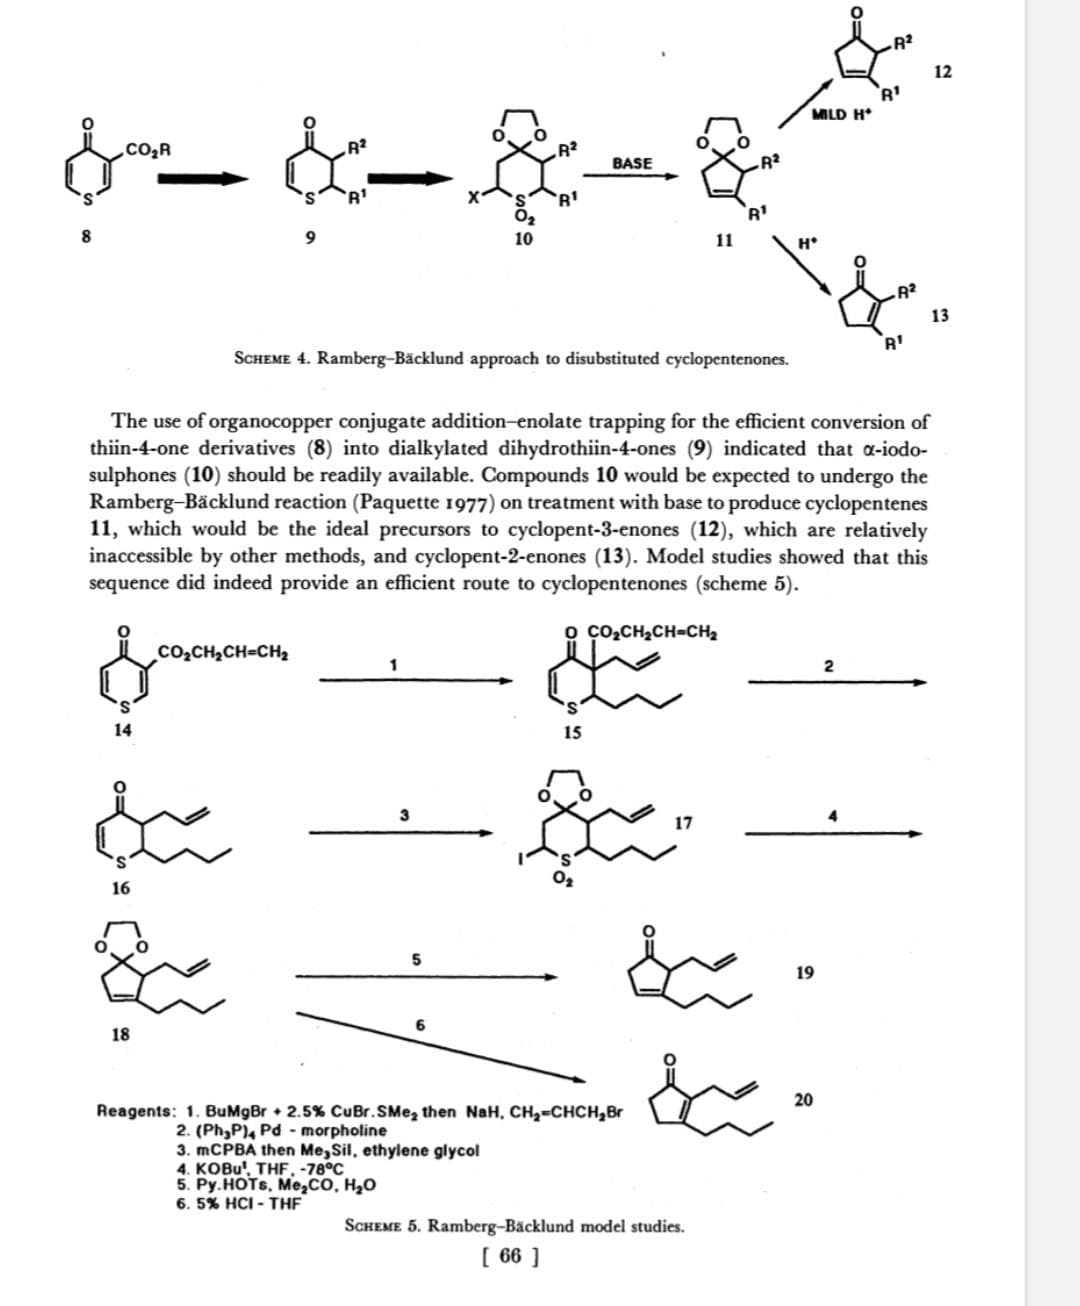 R
12
MILD H*
.CO,R
R2
BASE
R2
10
11
13
R'
SCHEME 4. Ramberg-Bäcklund approach to disubstituted cyclopentenones.
The use of organocopper conjugate addition-enolate trapping for the efficient conversion of
thiin-4-one derivatives (8) into dialkylated dihydrothiin-4-ones (9) indicated that a-iodo-
sulphones (10) should be readily available. Compounds 10 would be expected to undergo the
Ramberg-Bäcklund reaction (Paquette 1977) on treatment with base to produce cyclopentenes
11, which would be the ideal precursors to cyclopent-3-enones (12), which are relatively
inaccessible by other methods, and cyclopent-2-enones (13). Model studies showed that this
sequence did indeed provide an efficient route to cyclopentenones (scheme 5).
o co2CH2CH-CH2
Co,CH2CH=CH2
2
S.
14
15
3
17
16
5
19
18
20
Reagents: 1. BuMgBr 2.5% CuBr.SMe, then NaH, CH2-CHCH,Br
2. (Ph,P), Pd - morpholine
3. MCPBA then Me, Sil, ethylene glycol
4. KOBU', THF, -78°C
5. Py.HOTS, Me,cO, H2O
6. 5% HCI - THF
SCHEME 5. Ramberg-Bäcklund model studies.
[ 66 ]
